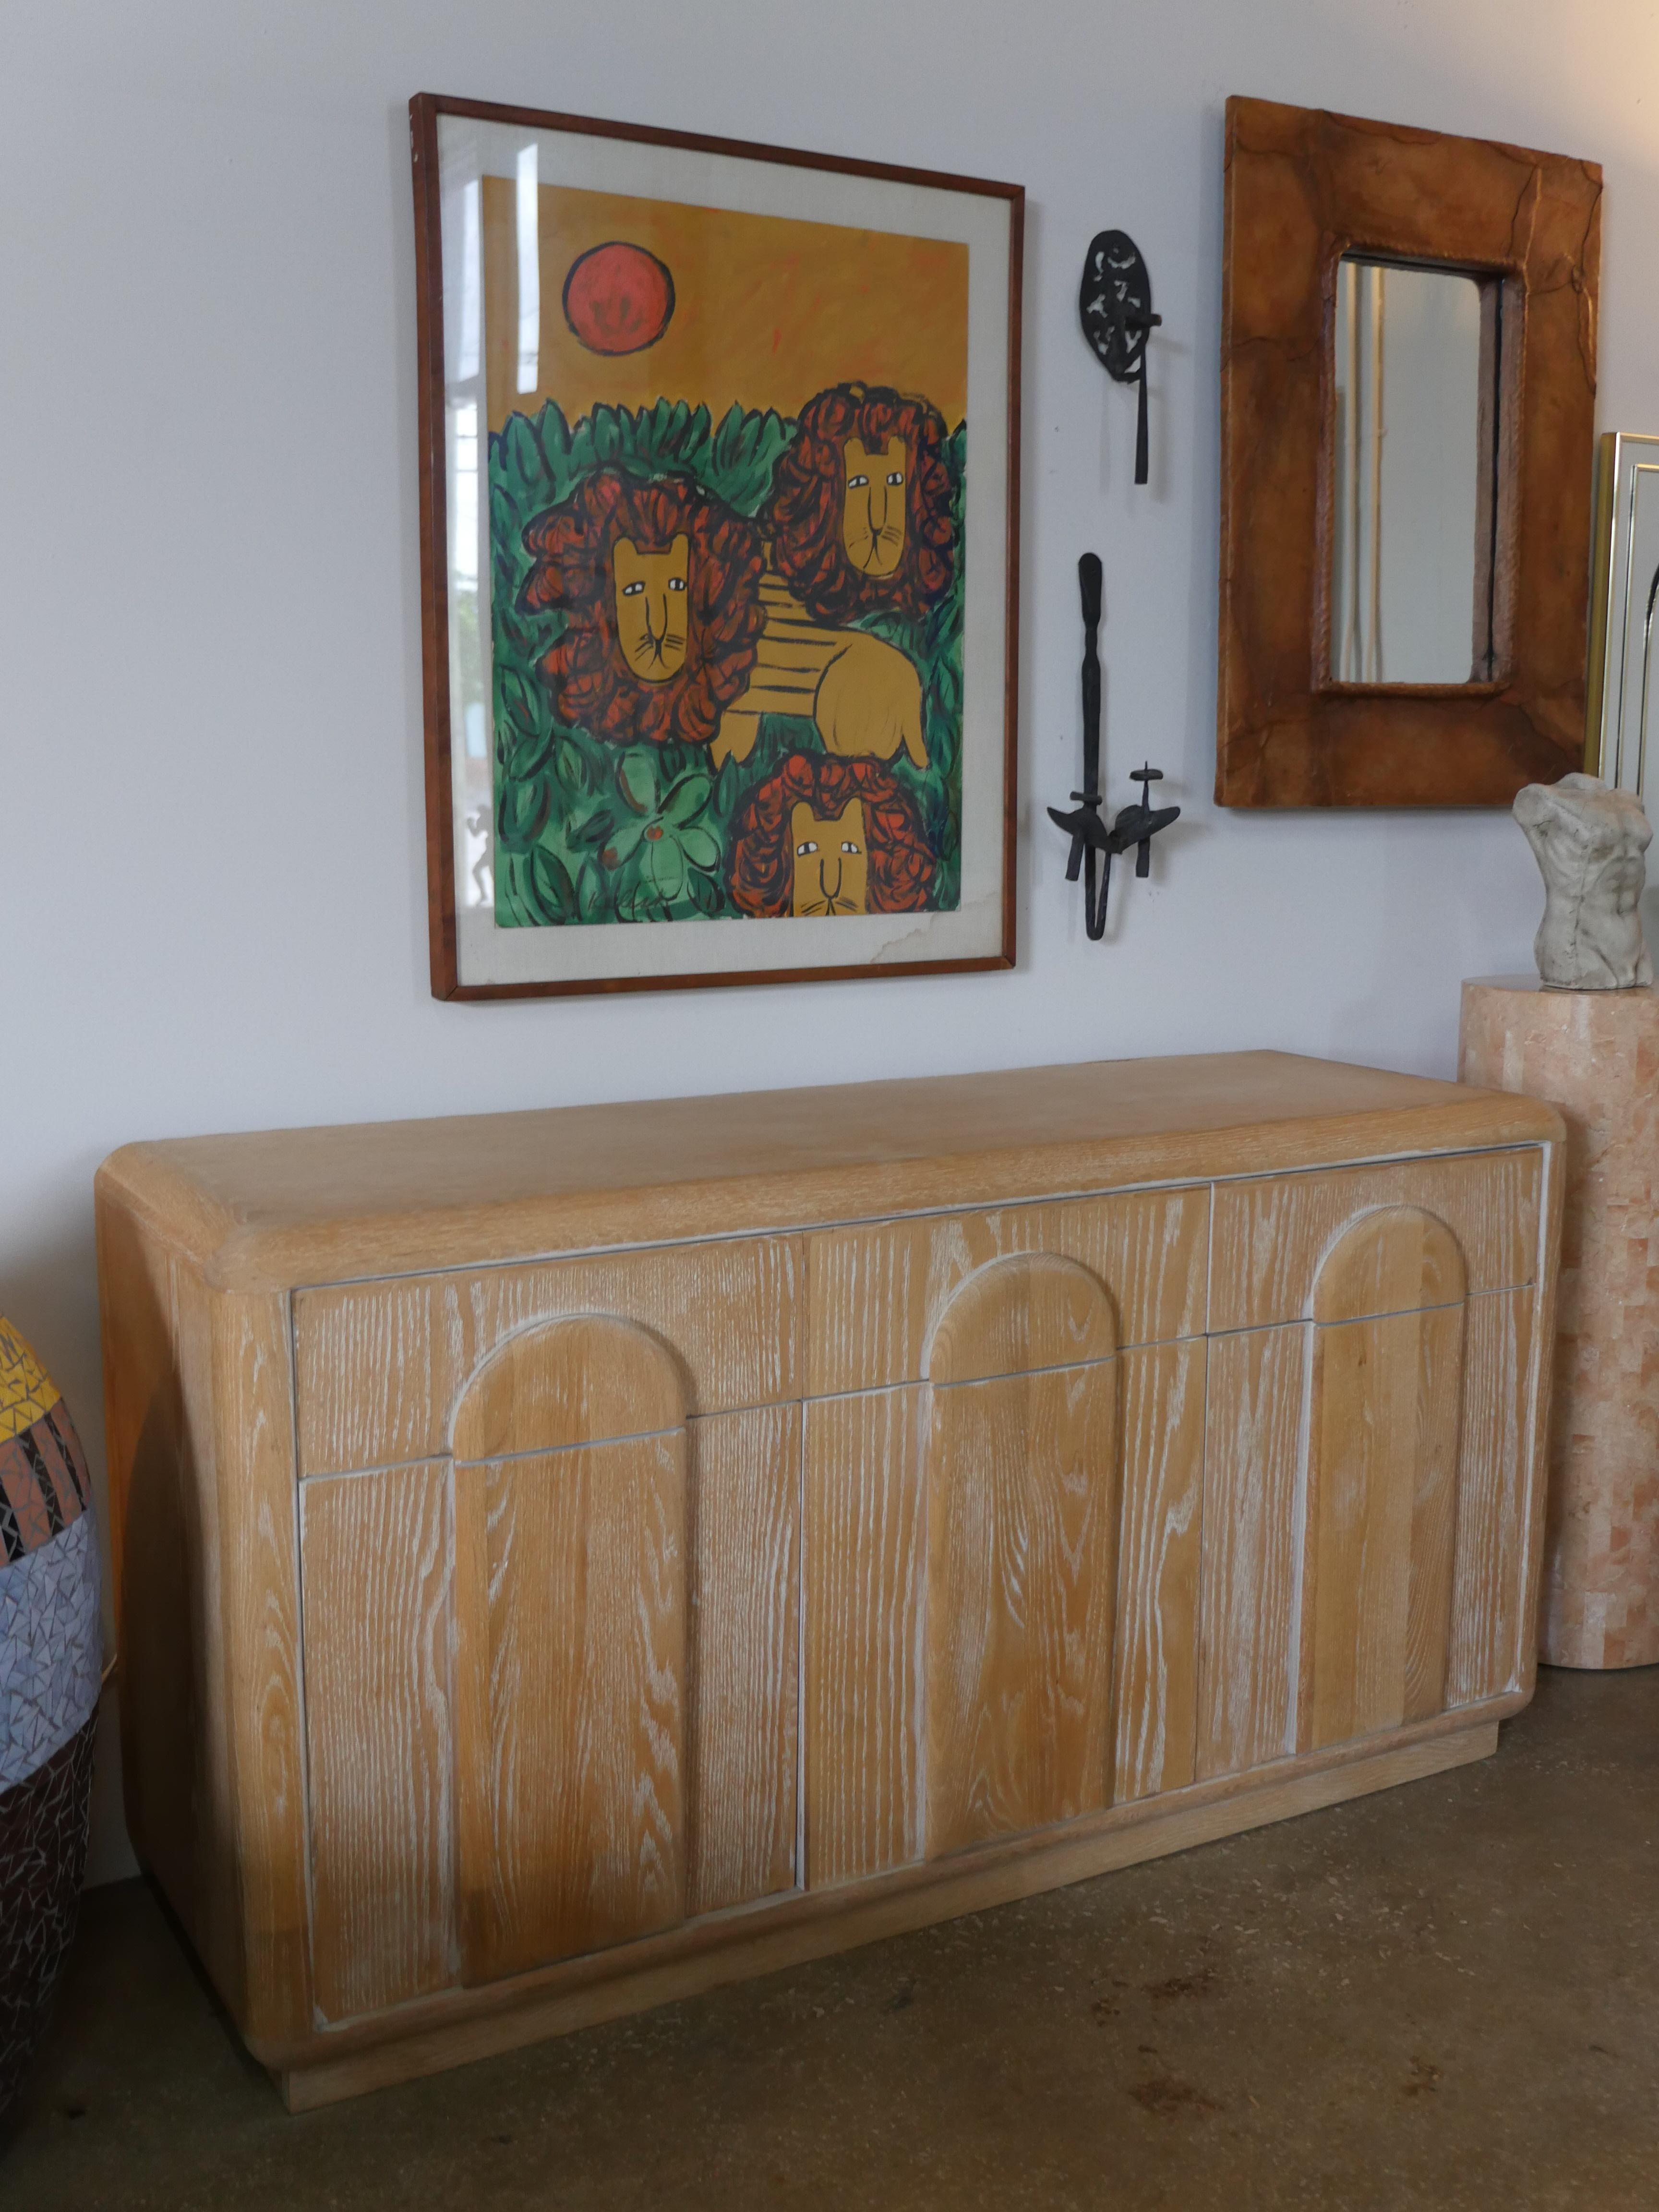 1980s cerused oak wood sideboard with arched detailed doors. The original owners had the oak wood bleached, giving it a beautiful coastal look that fits well in any space.